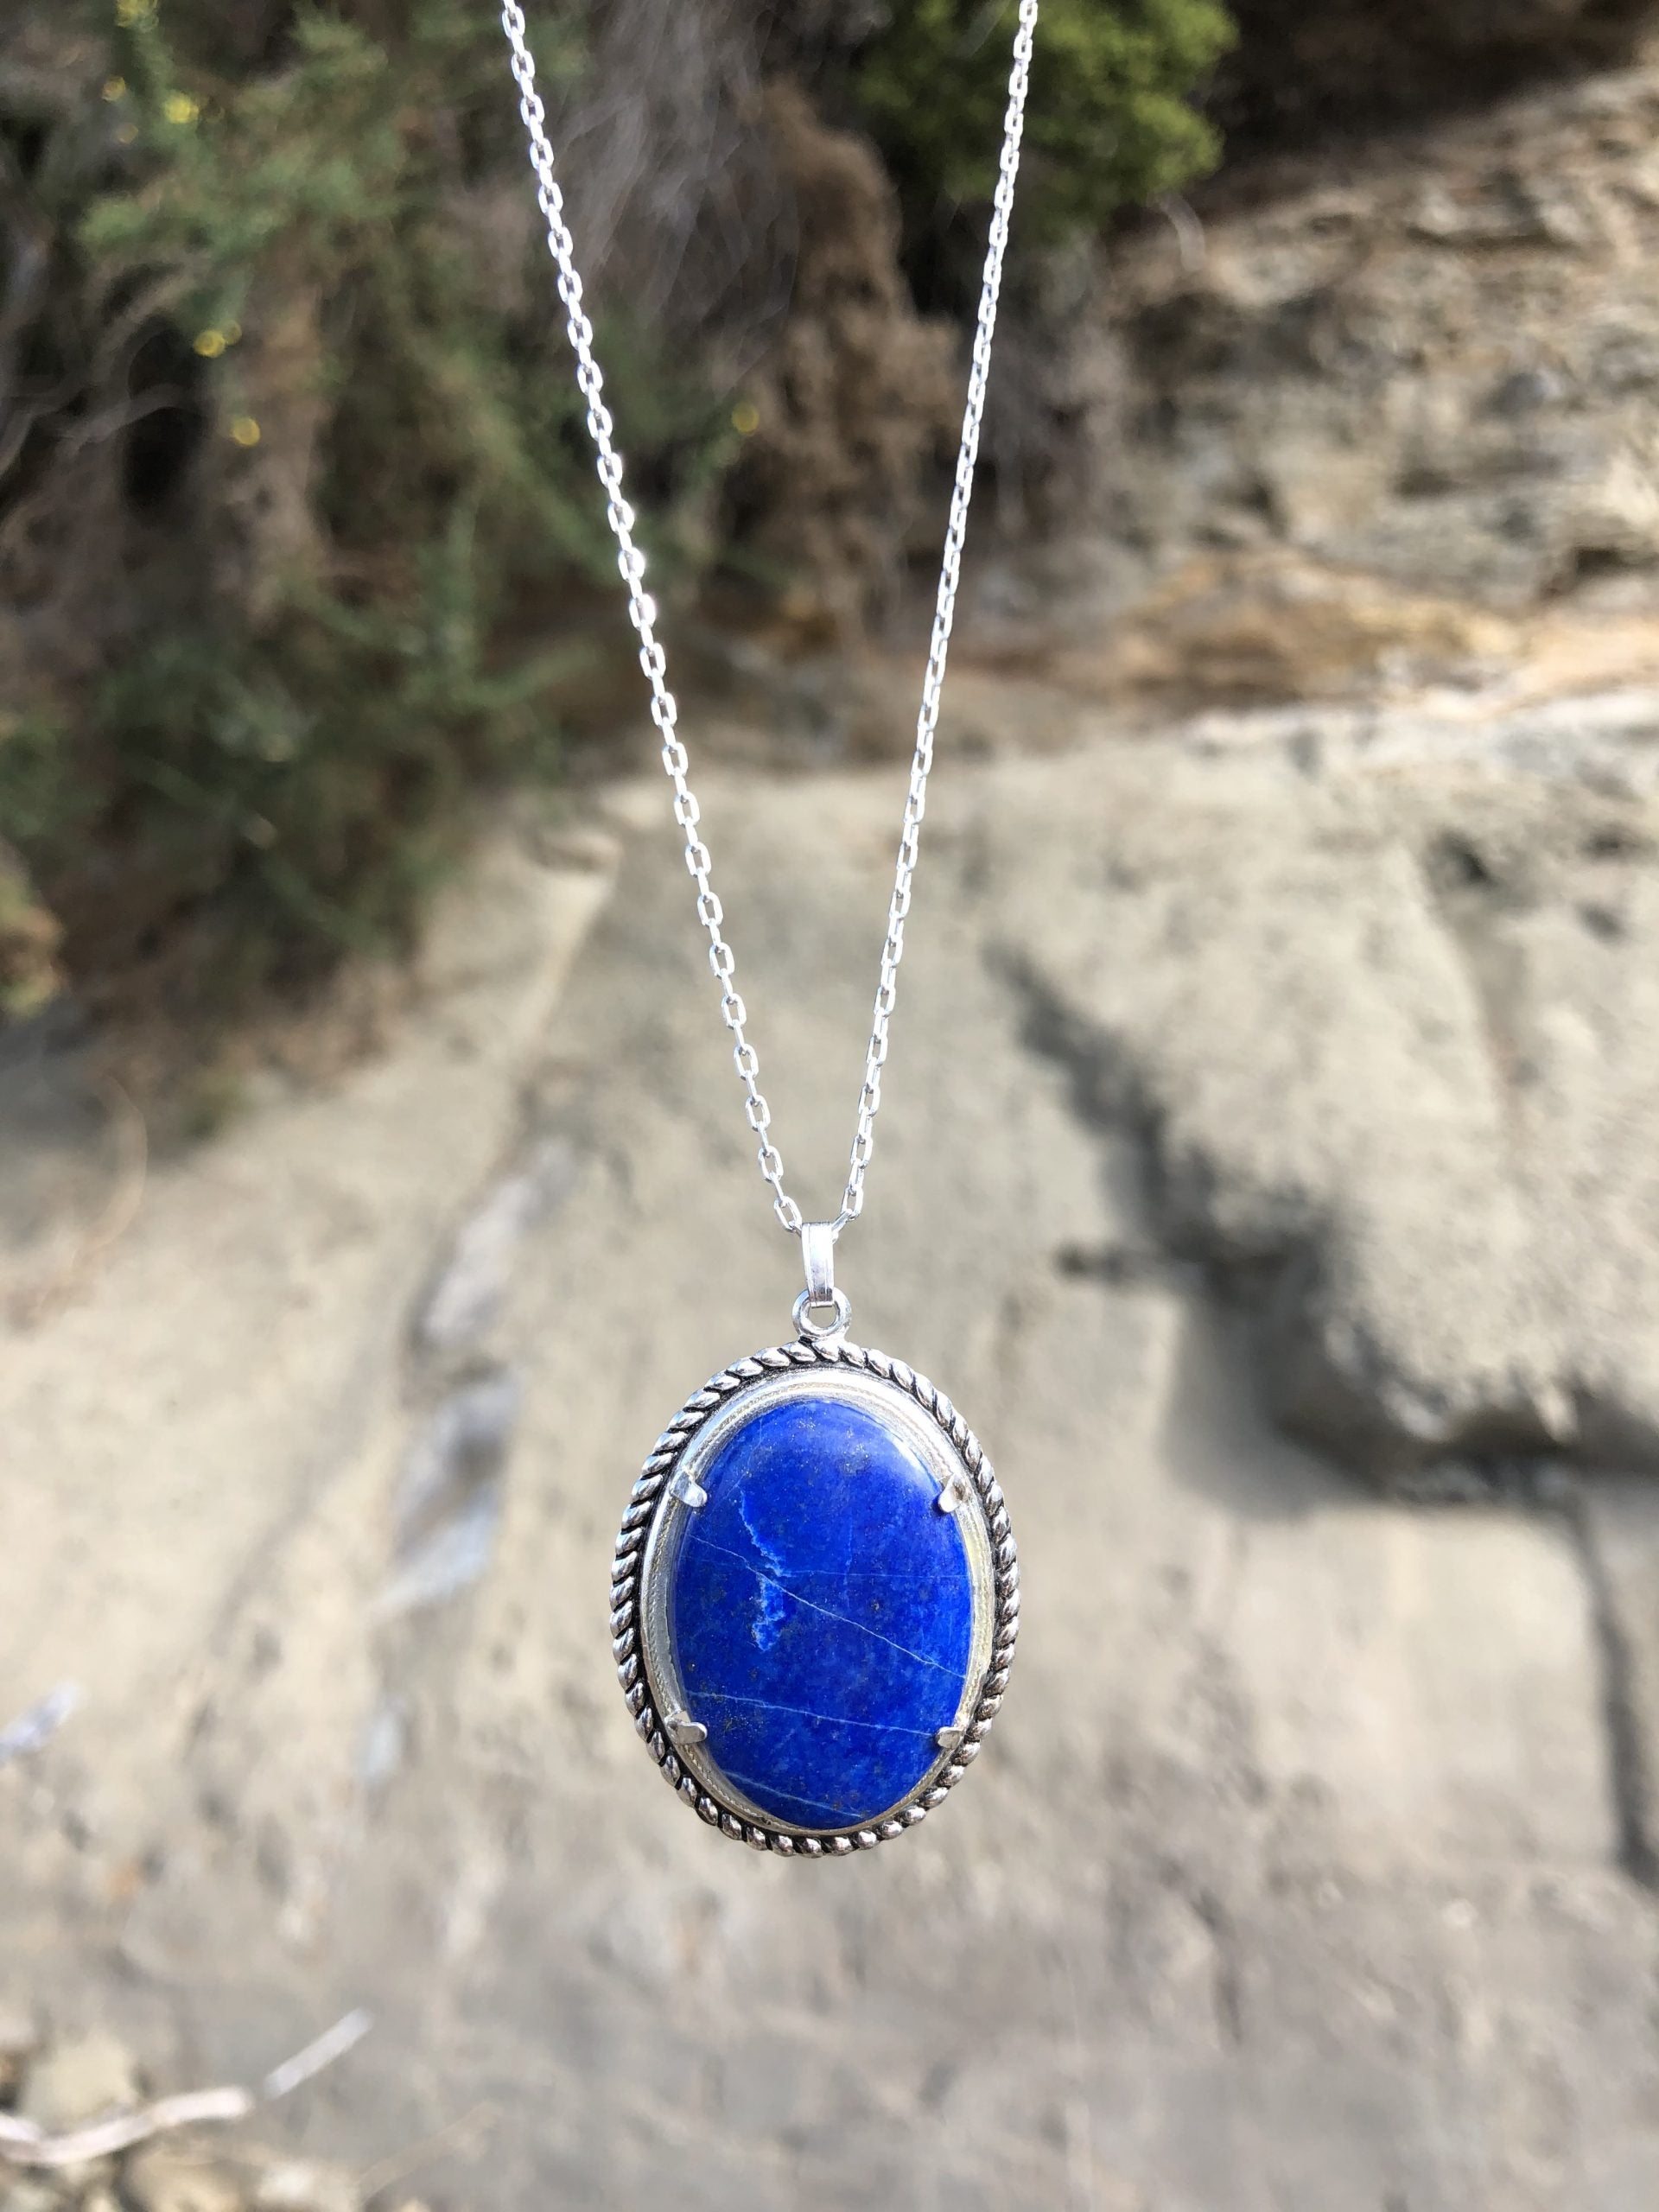 Necklace with rich blue lapis lazuli, hand cut to a 30x20mm cabochon and set in silver plated setting with 19 inch chain